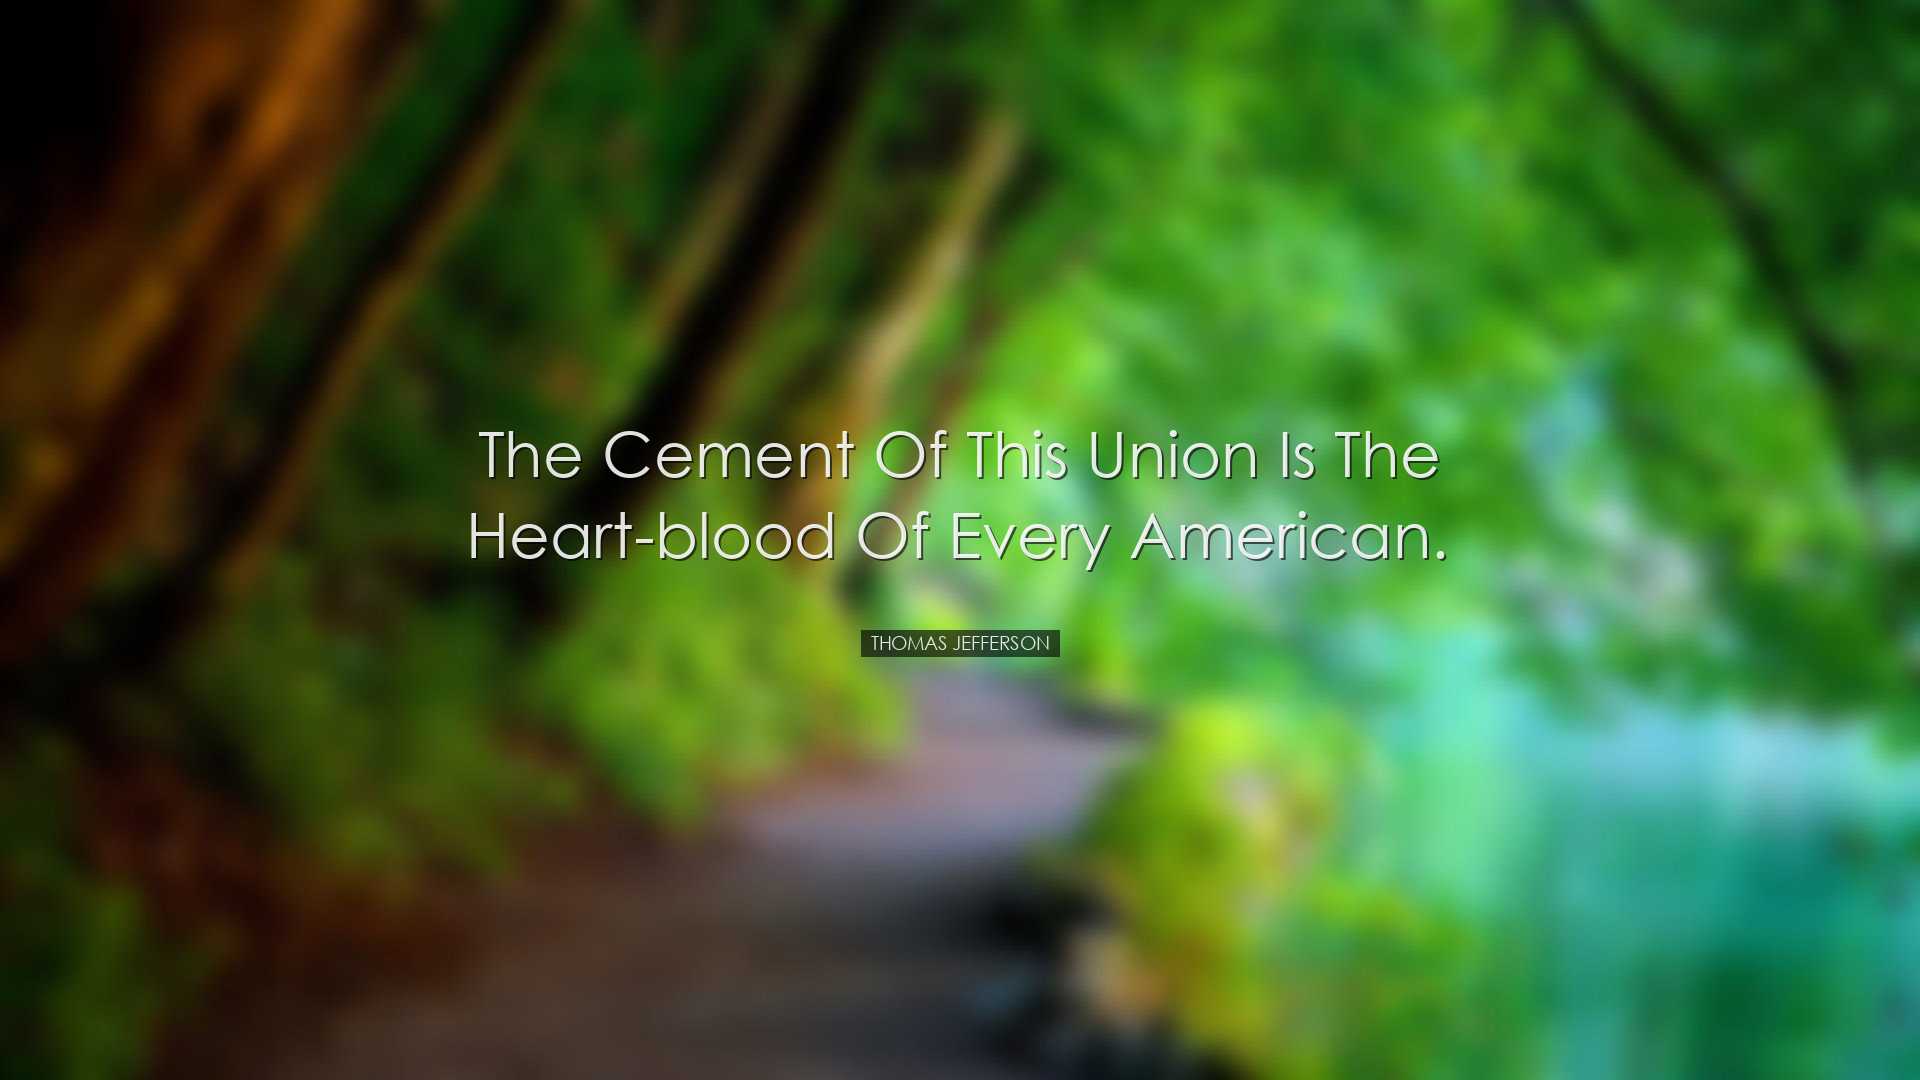 The cement of this union is the heart-blood of every American. - T